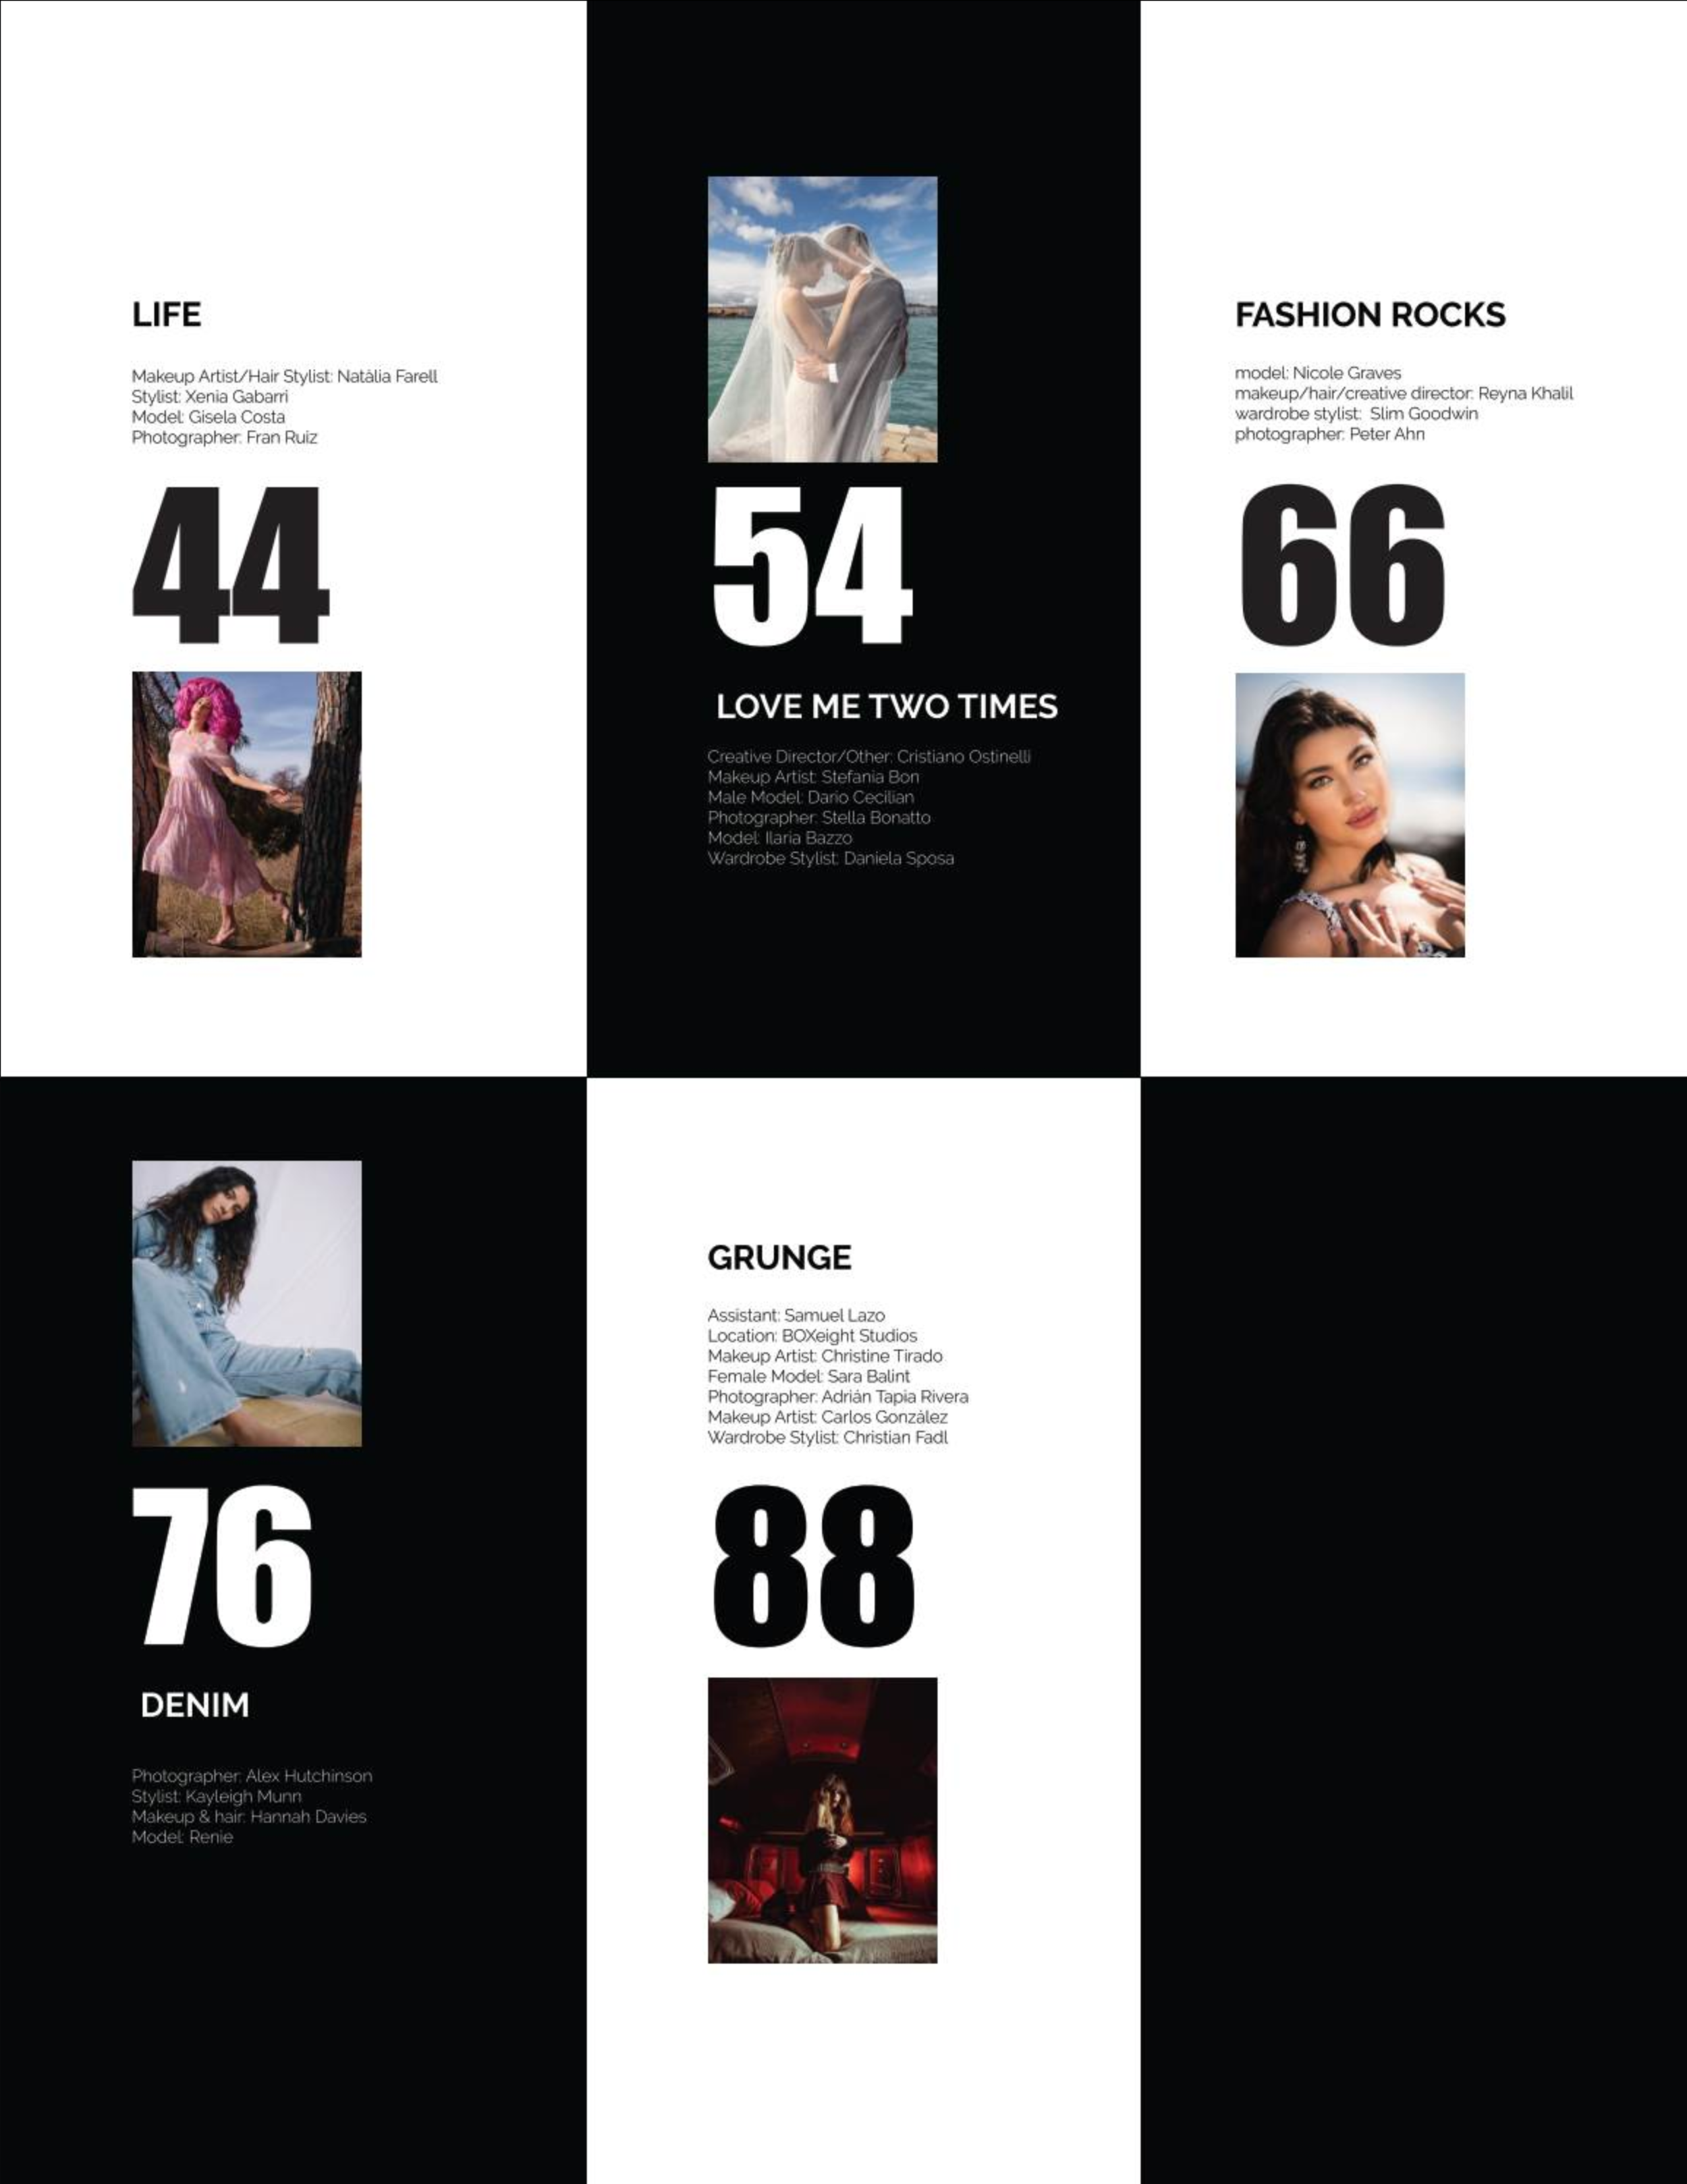 1 Fienfh Magazine April Issue 2021 - INDEX 2.png